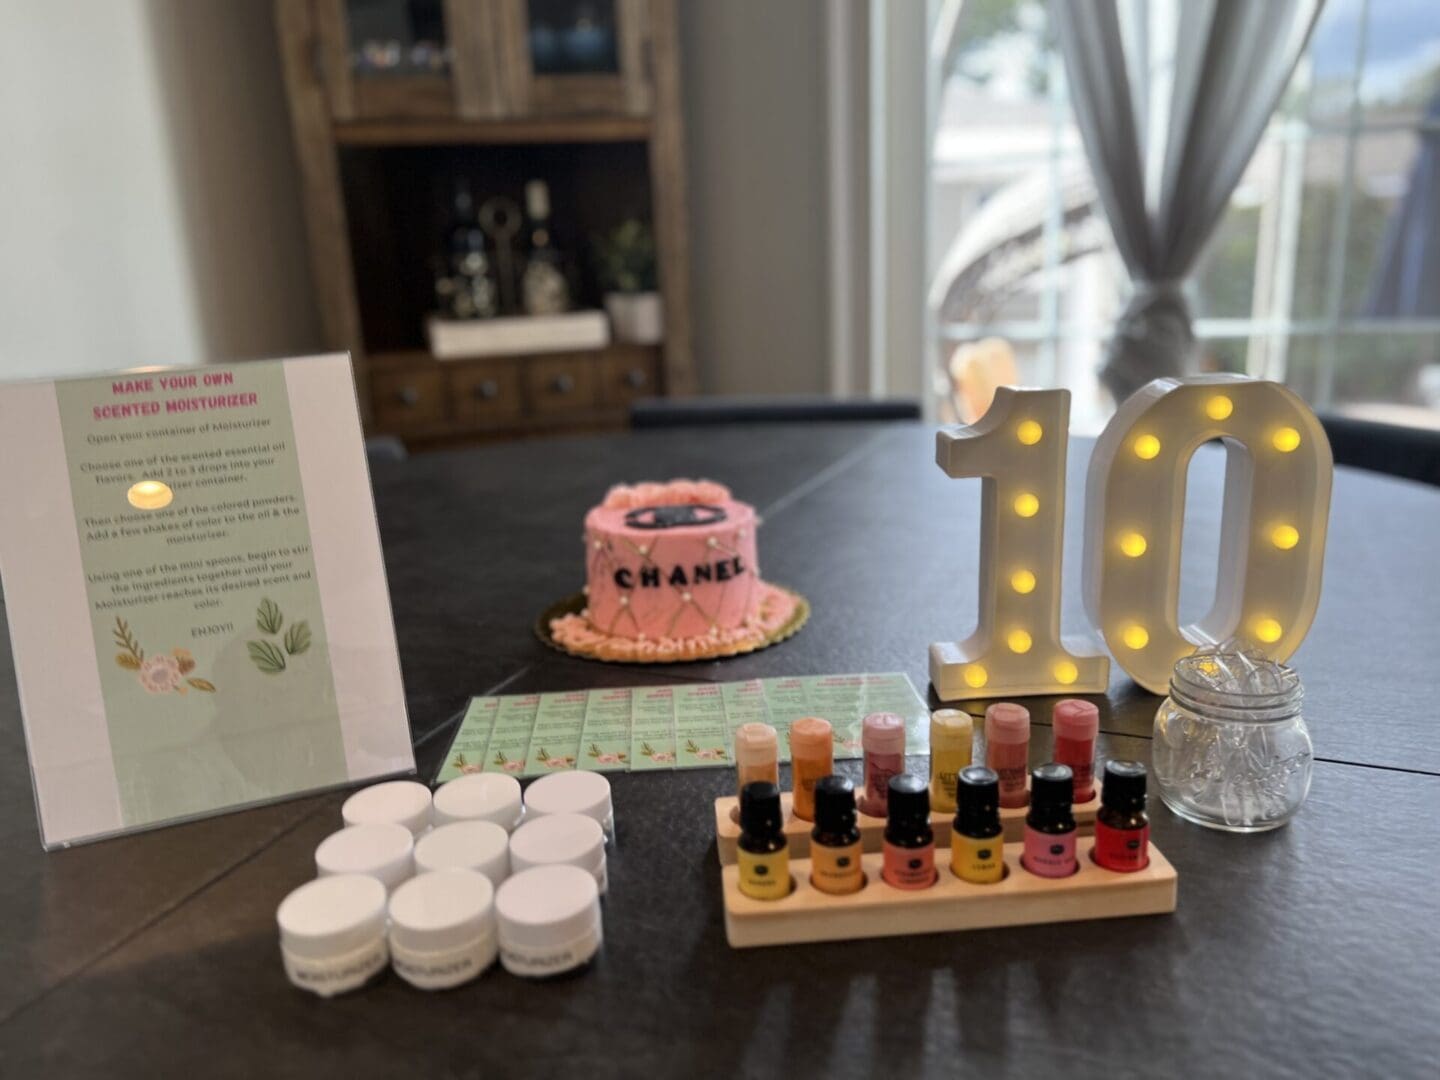 A table with a cake, nail polish, and other items.